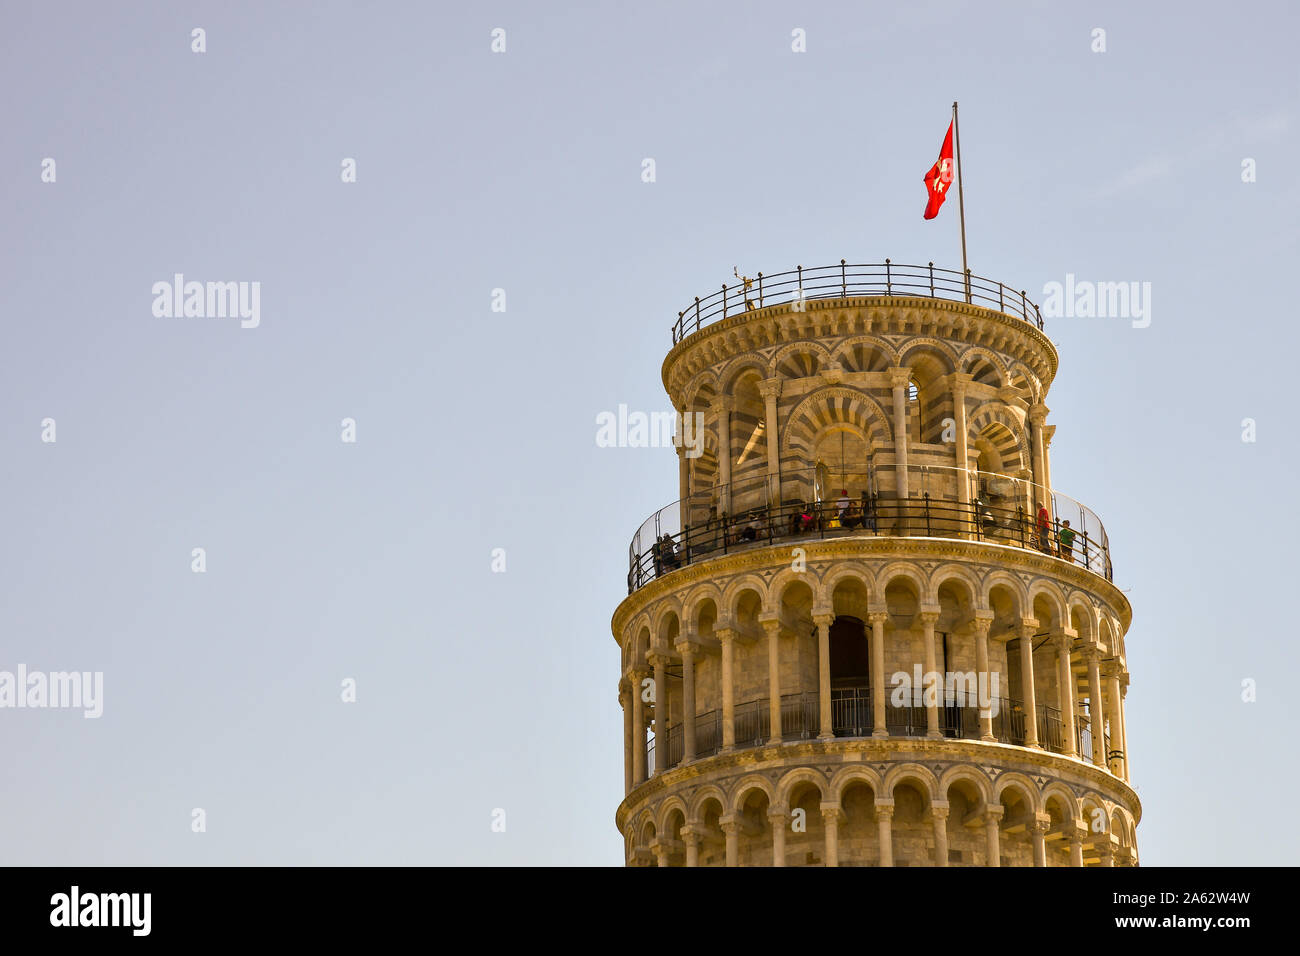 Upper part of the famous Leaning Tower in Piazza dei Miracoli of Pisa with tourists on the top terrace against blue sky background, Tuscany, Italy Stock Photo